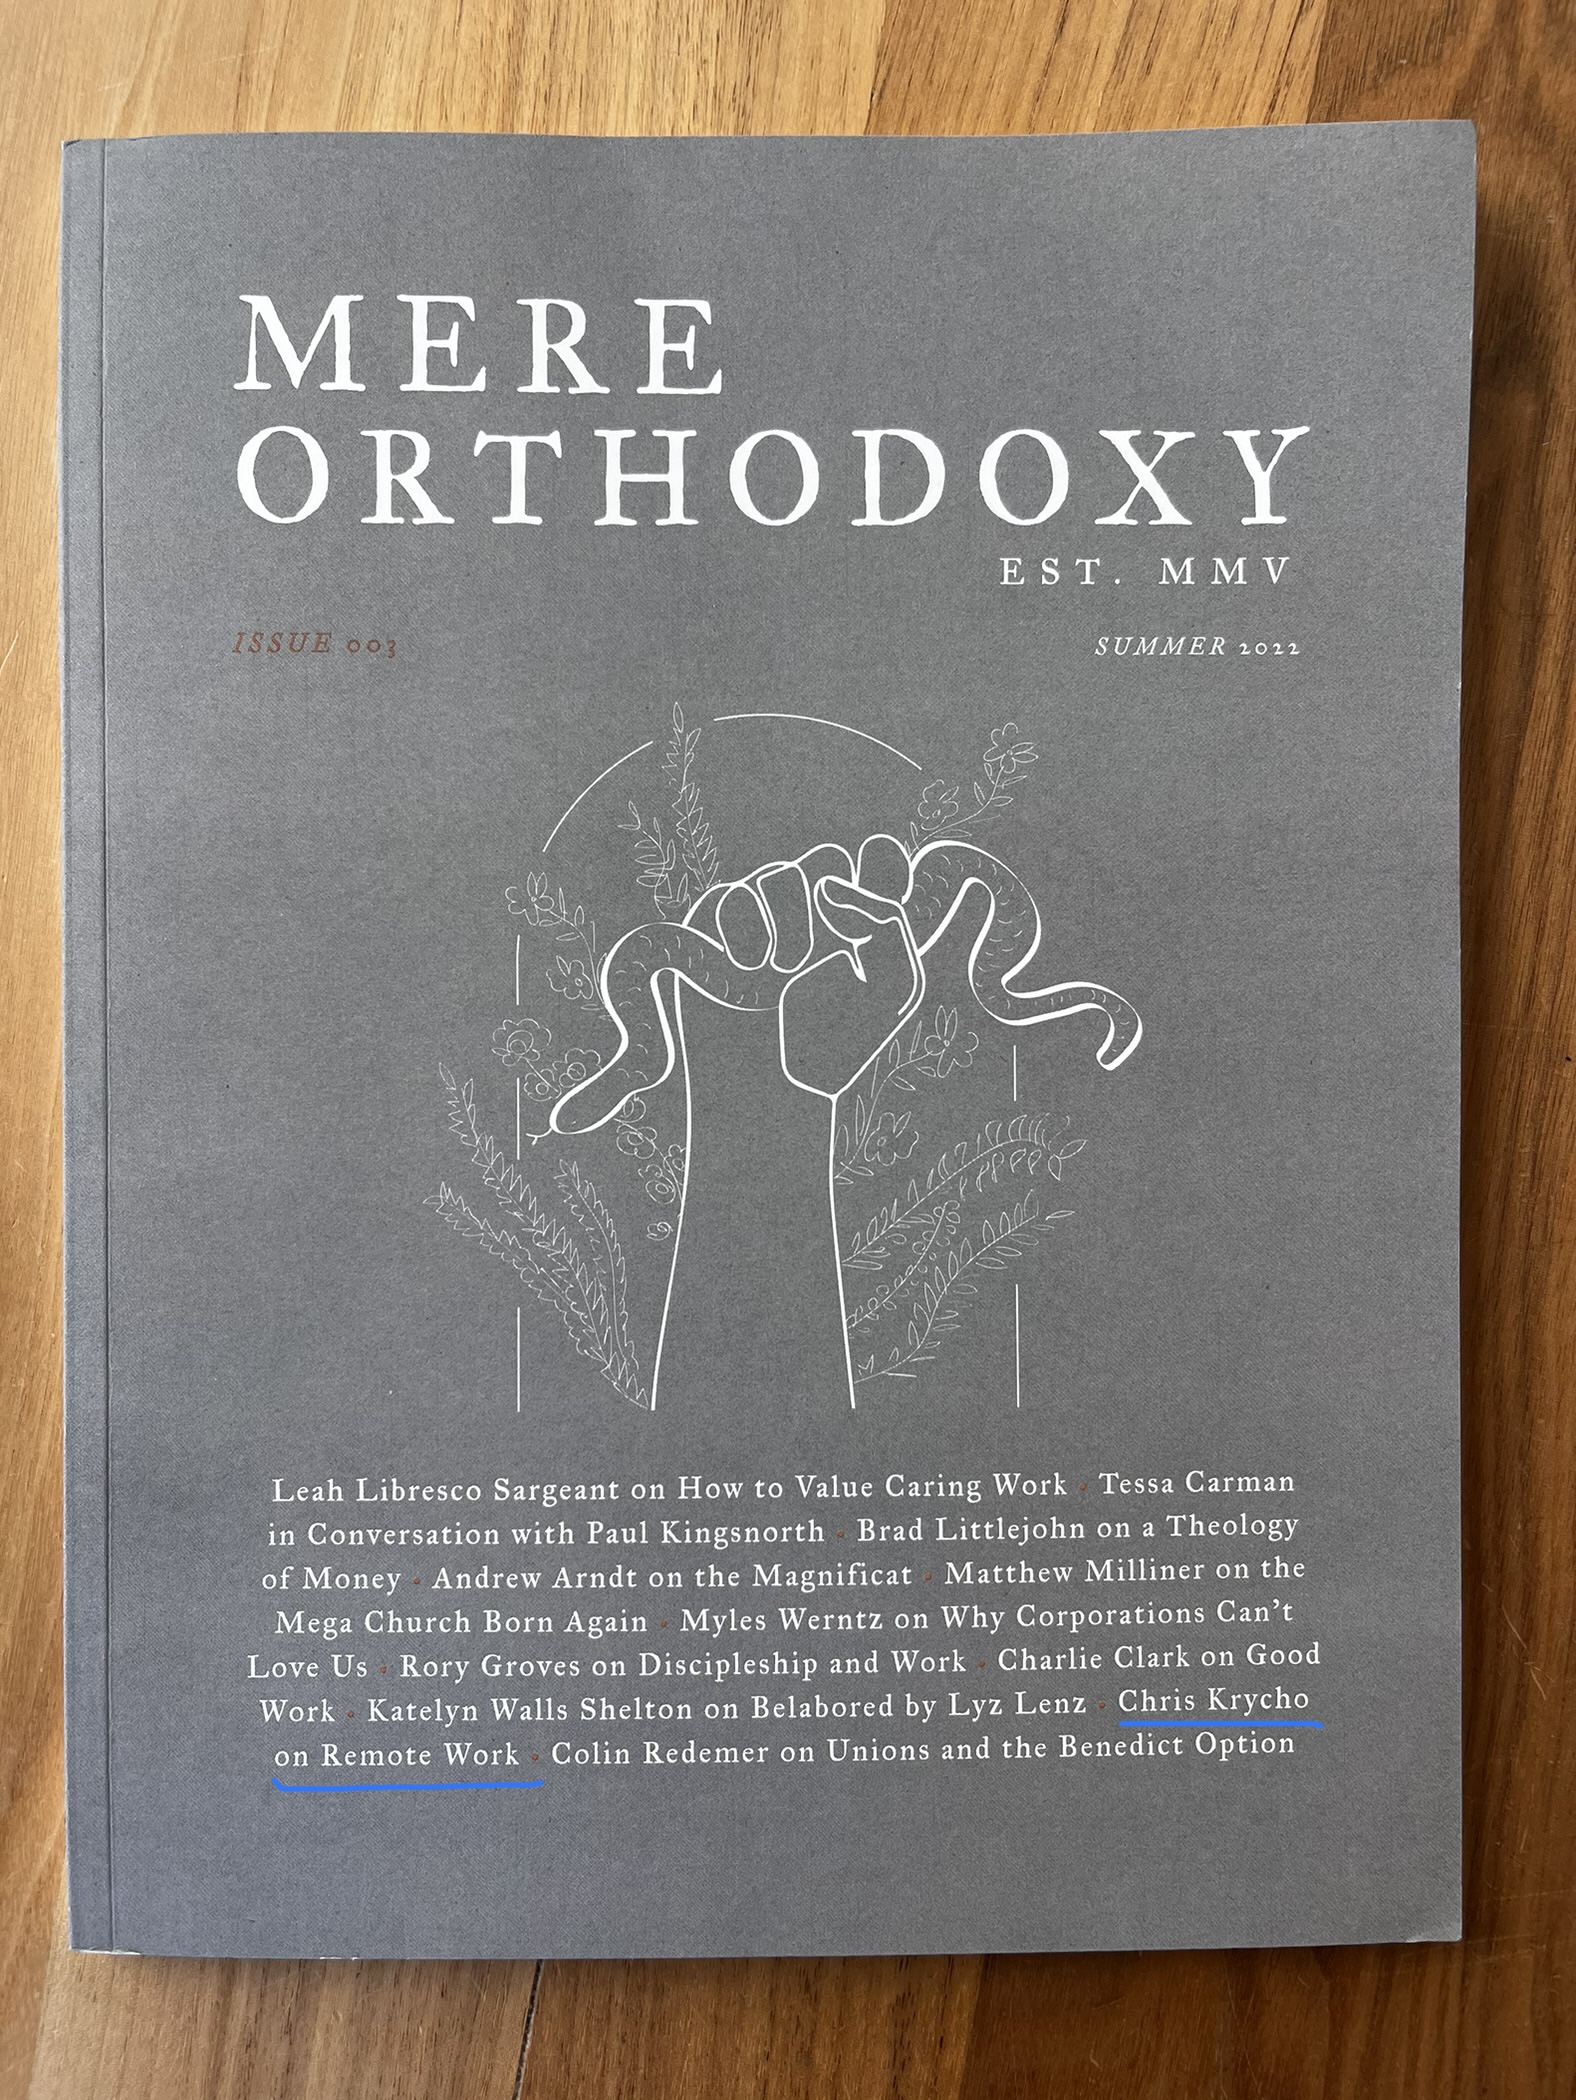 Cover of Mere Orthodoxy magazine with 'Chris Krycho on Remote Work' underlined